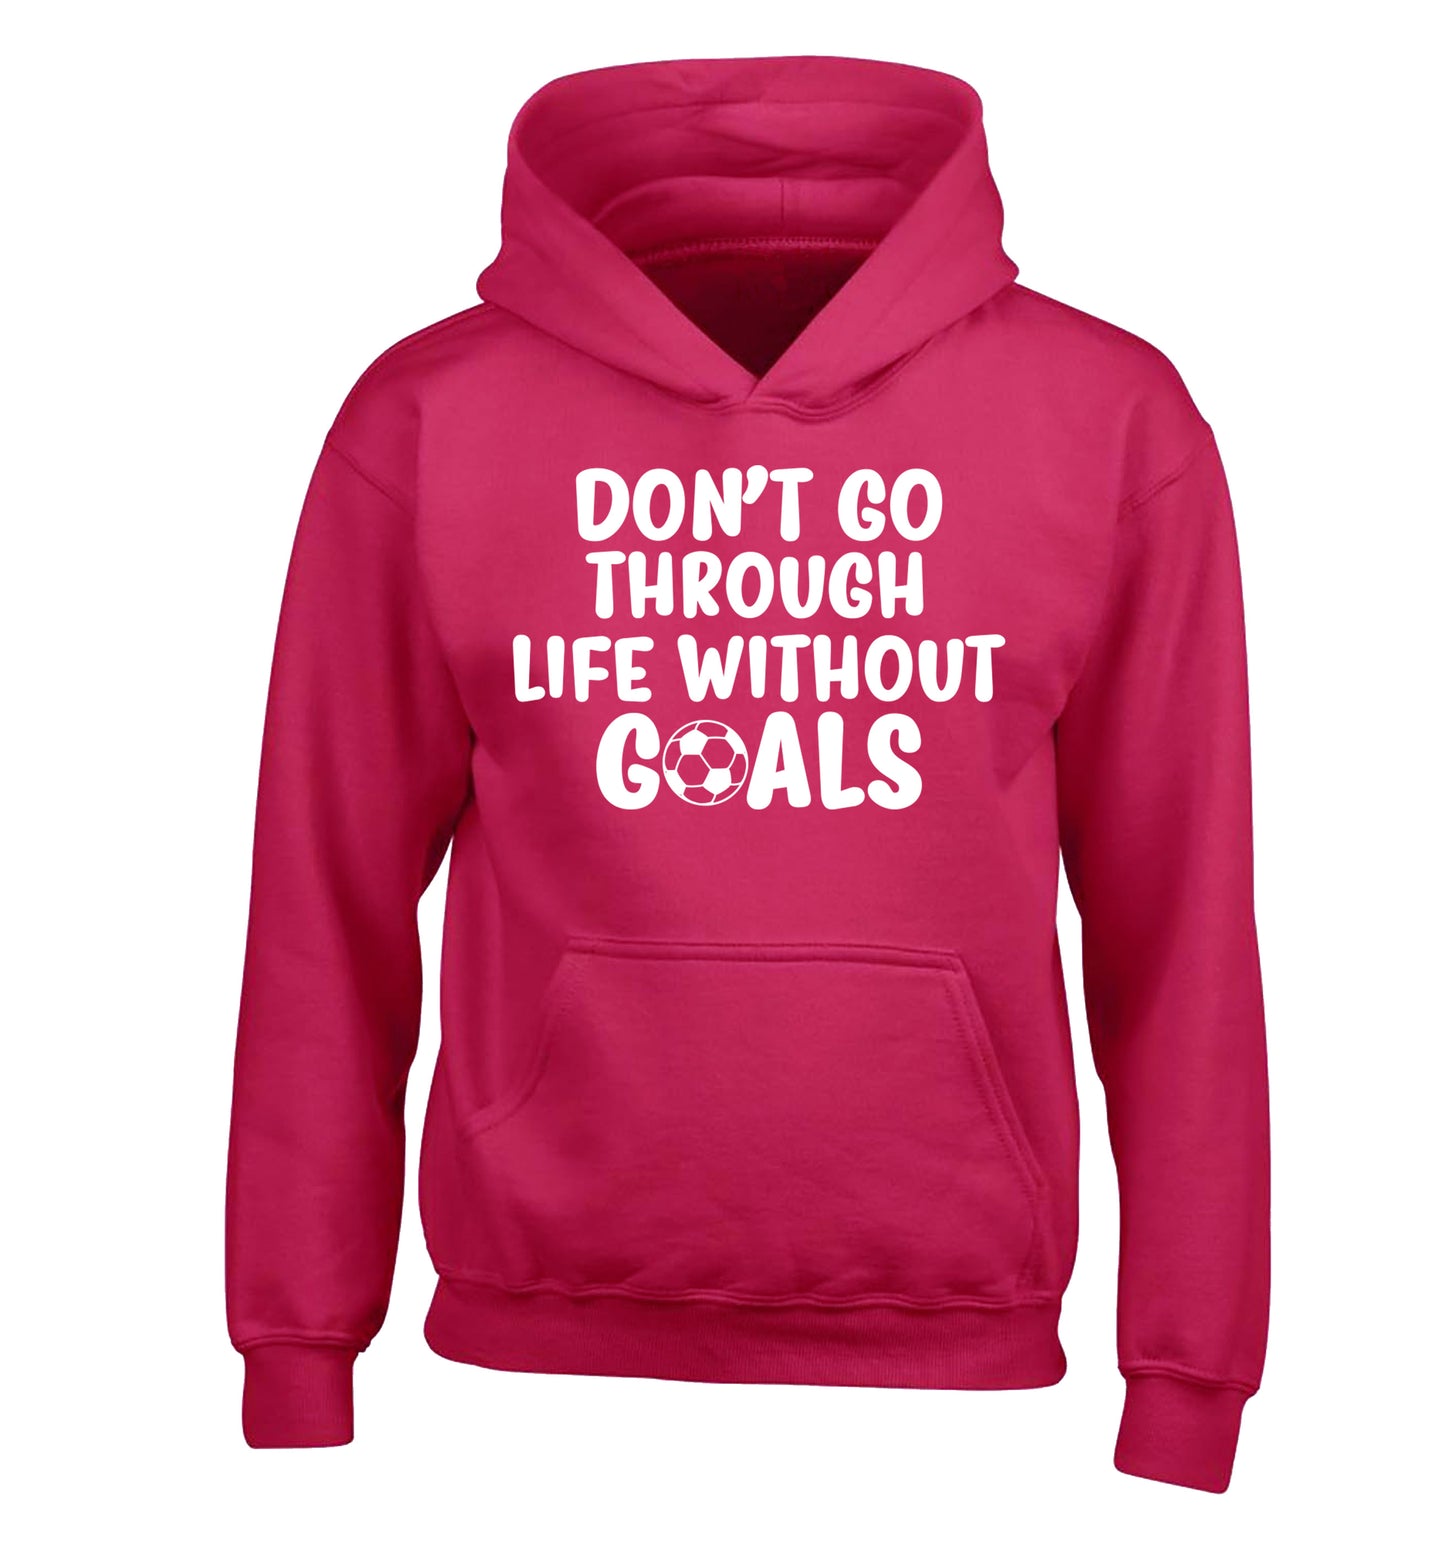 Don't go through life without goals children's pink hoodie 12-14 Years